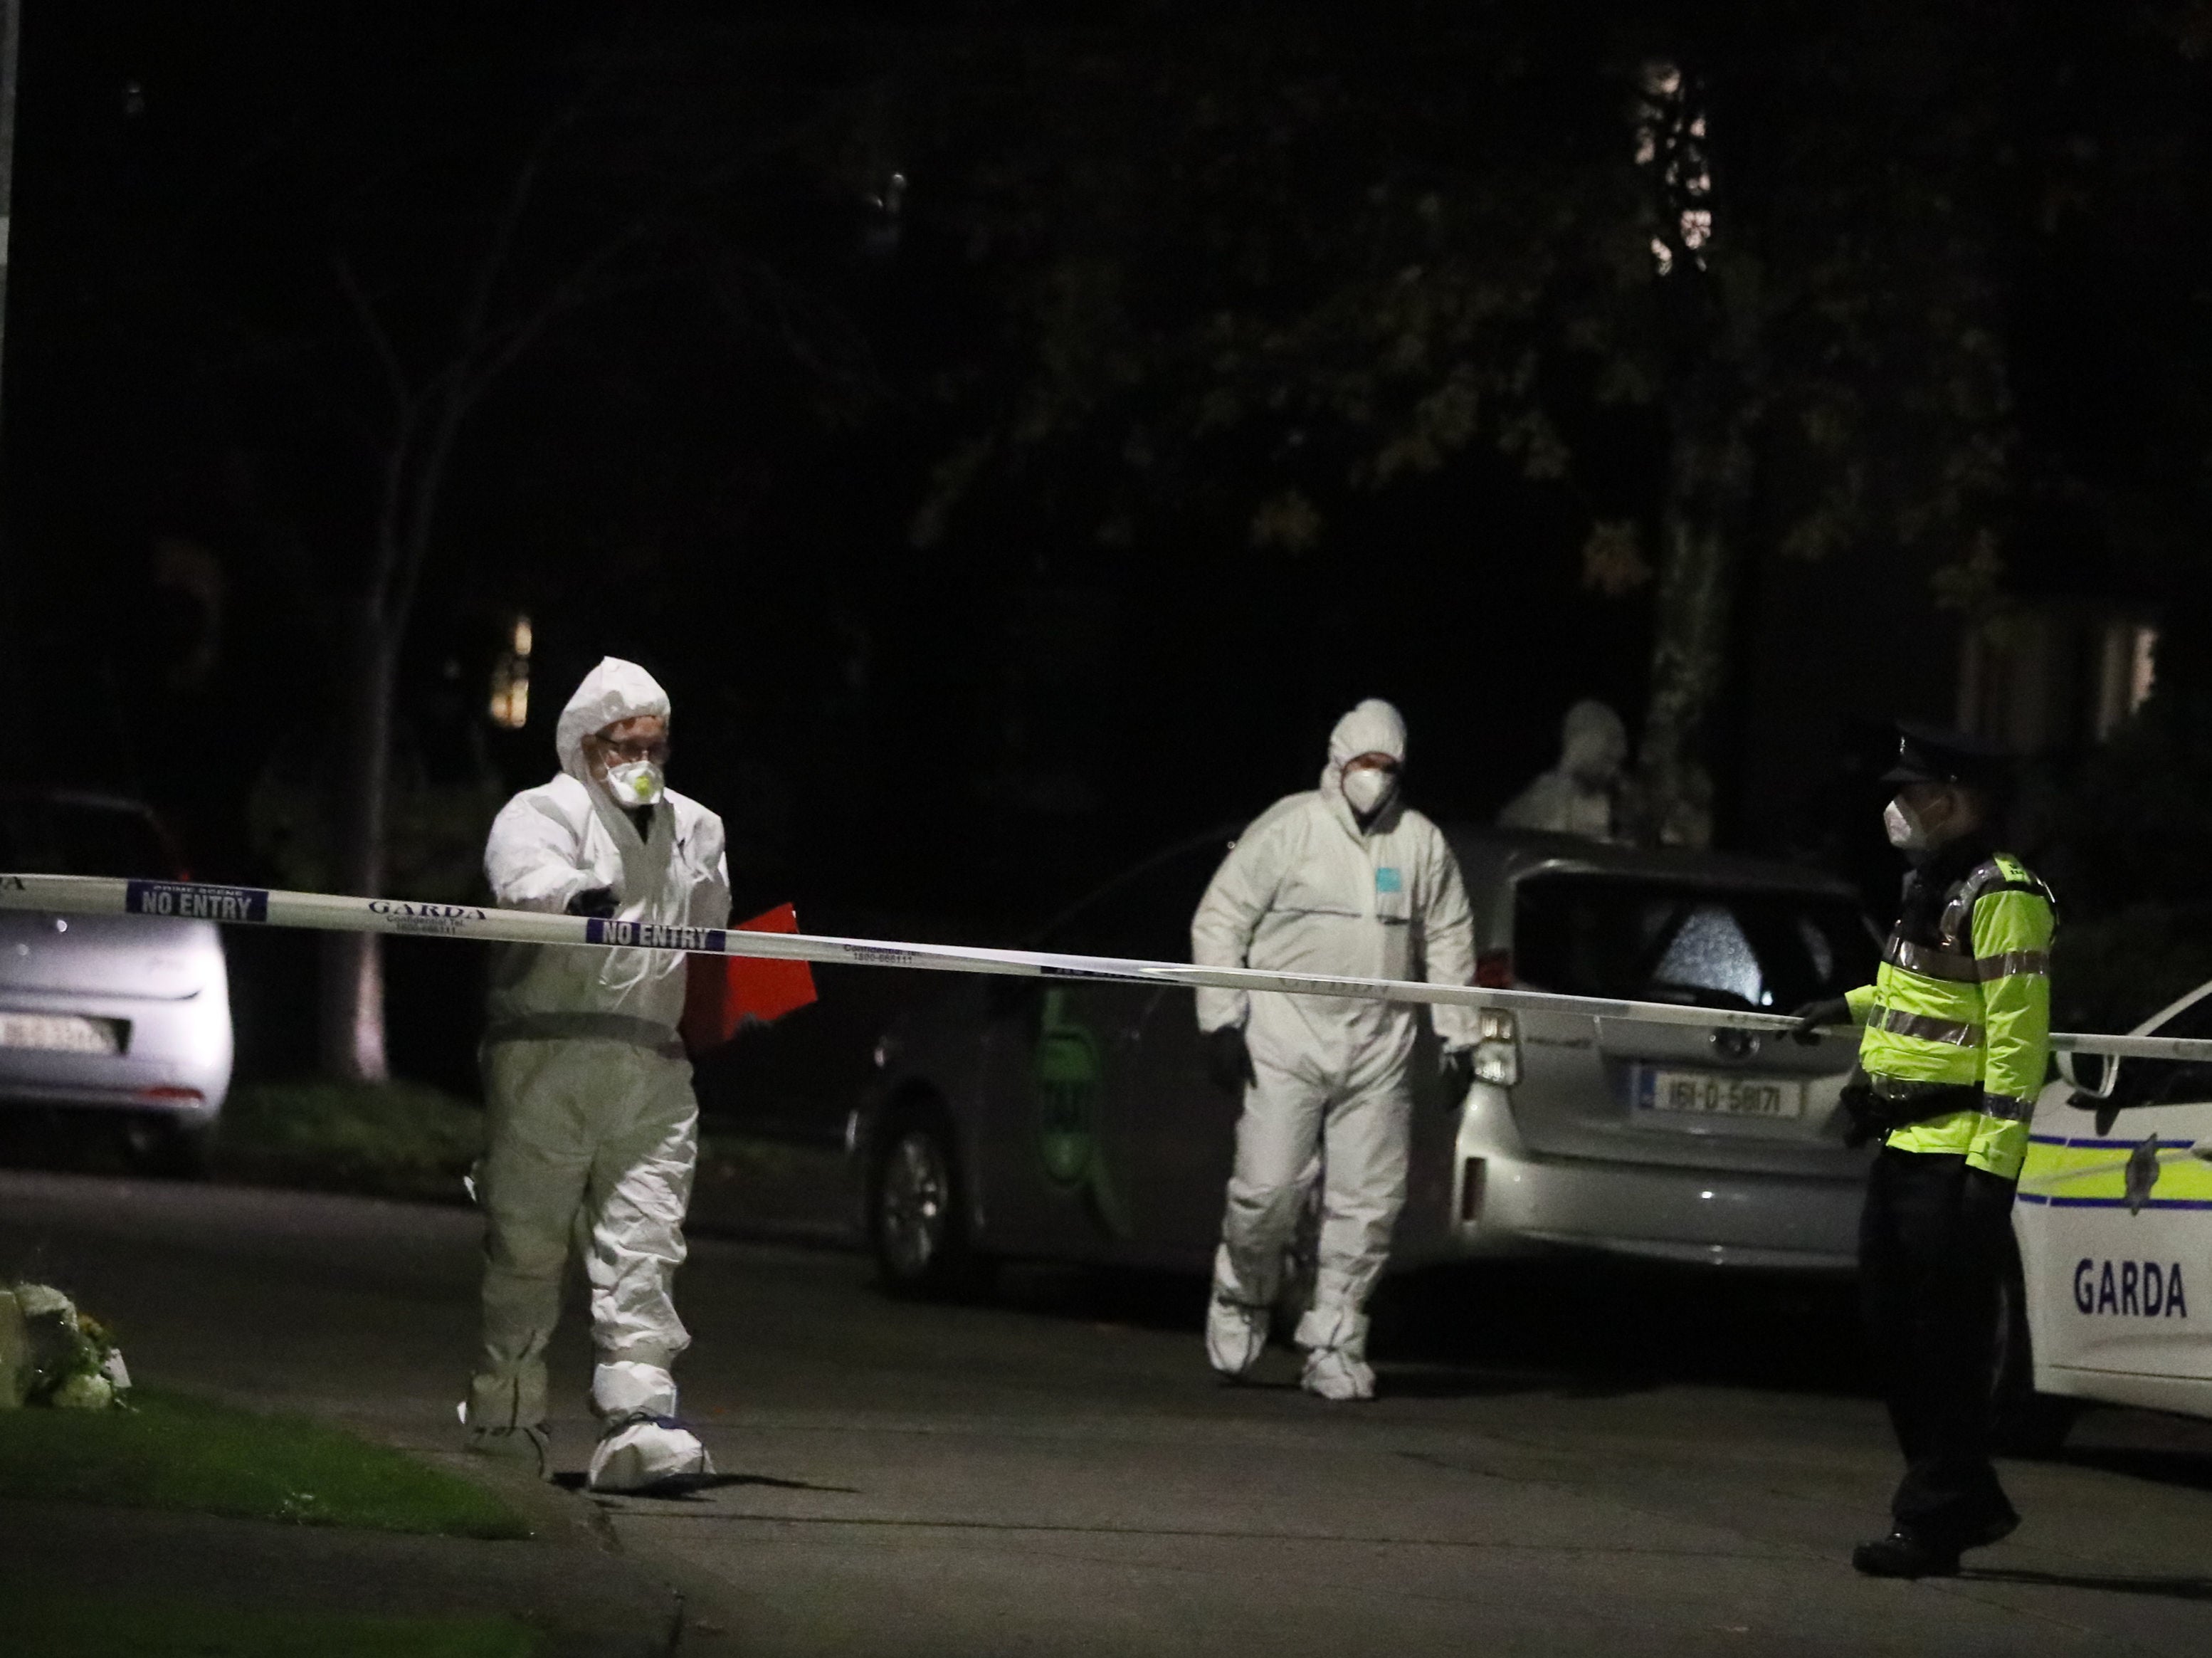 Forensic officers the scene in the Llewellyn estate in Ballinteer, south Dublin, following the discovery of bodies of a woman and two young children